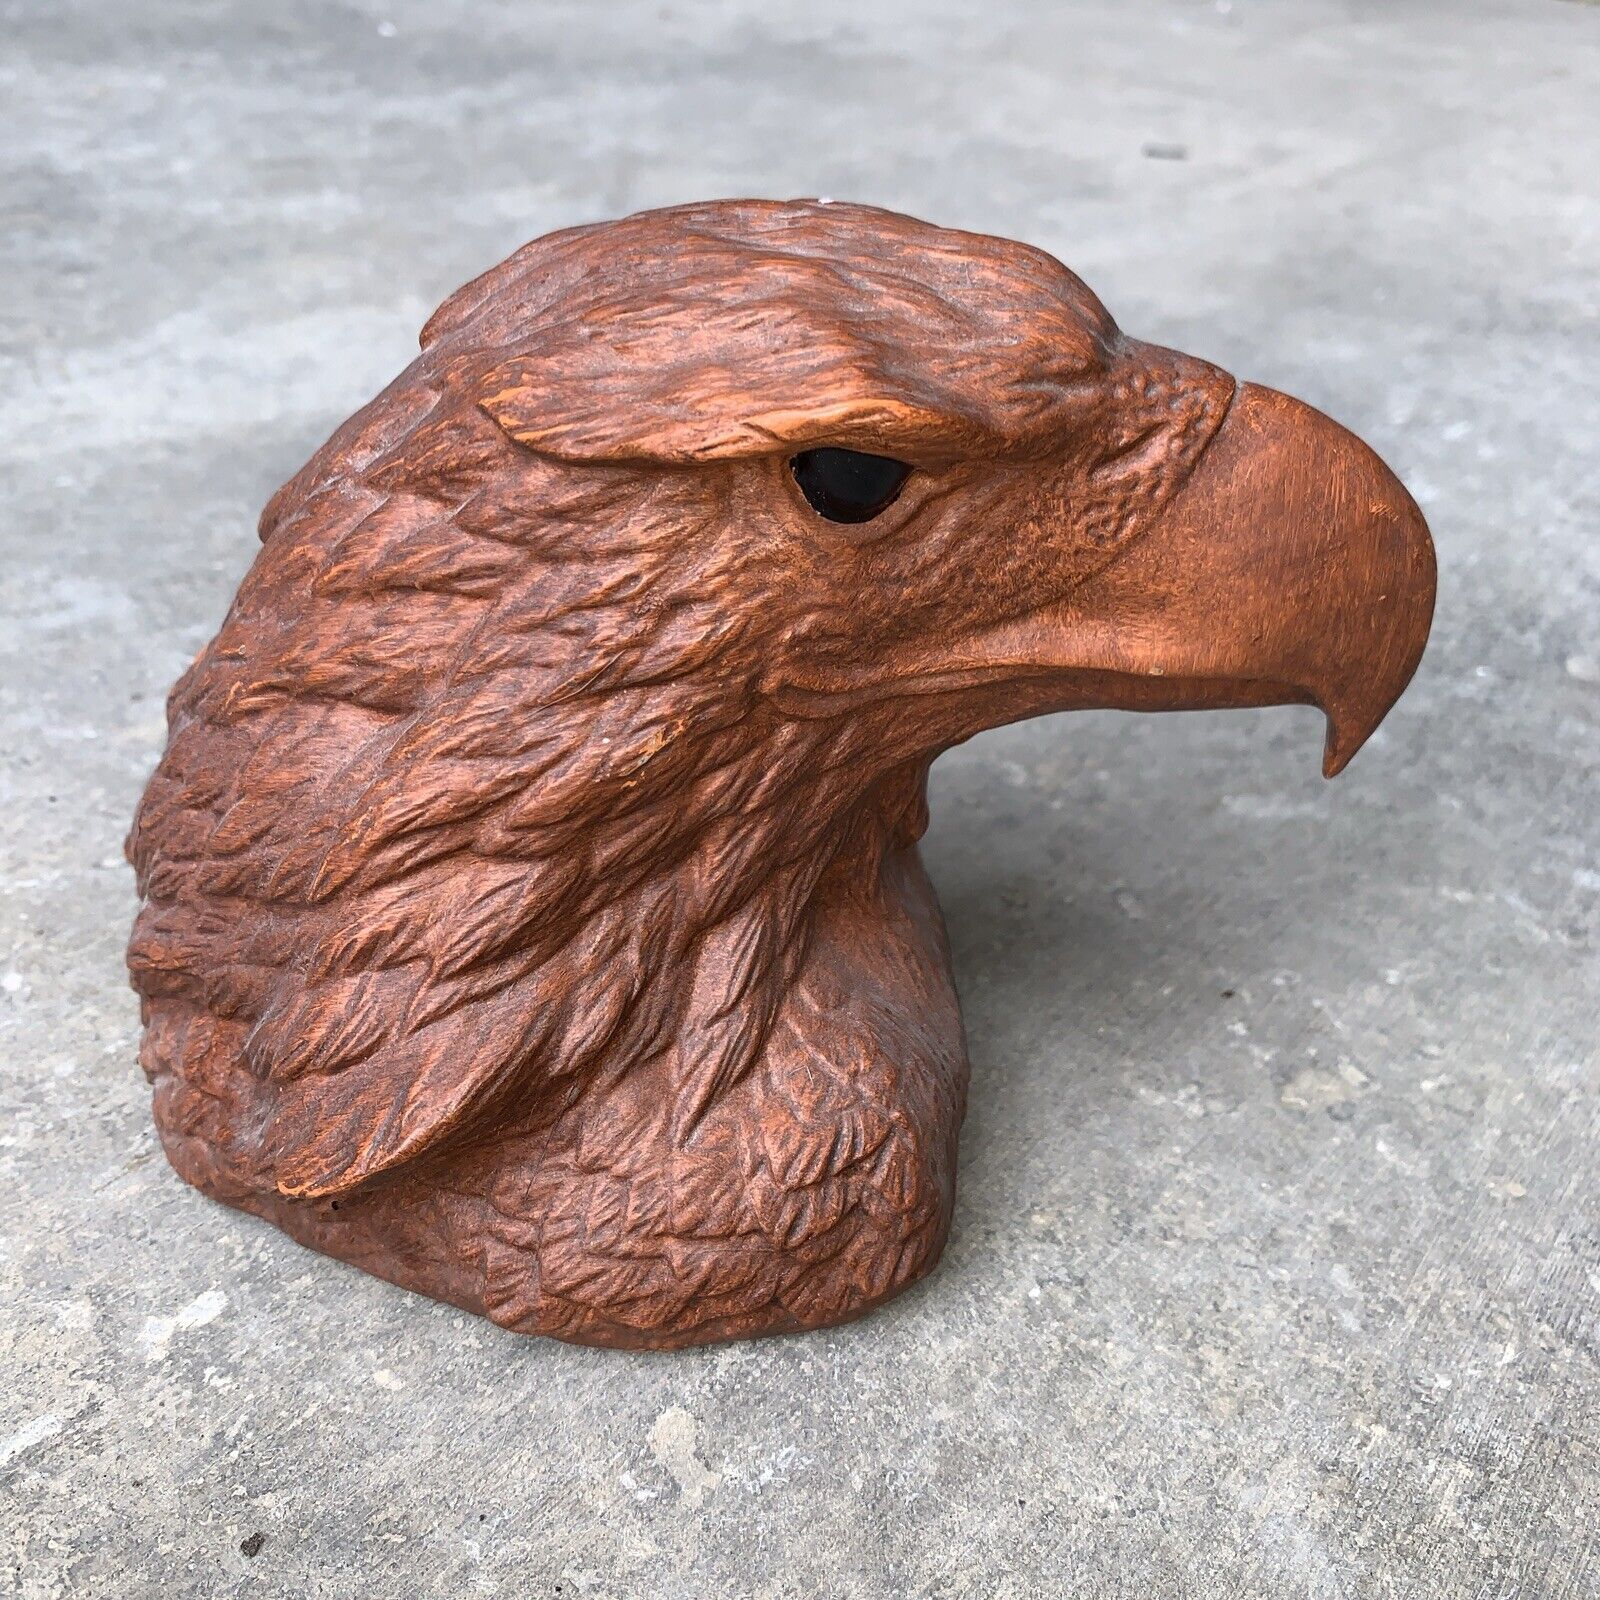 Vintage 1990 Eagle Head Bust Sculpture Red Mill Mfg USA American 7”x5”x4.5”